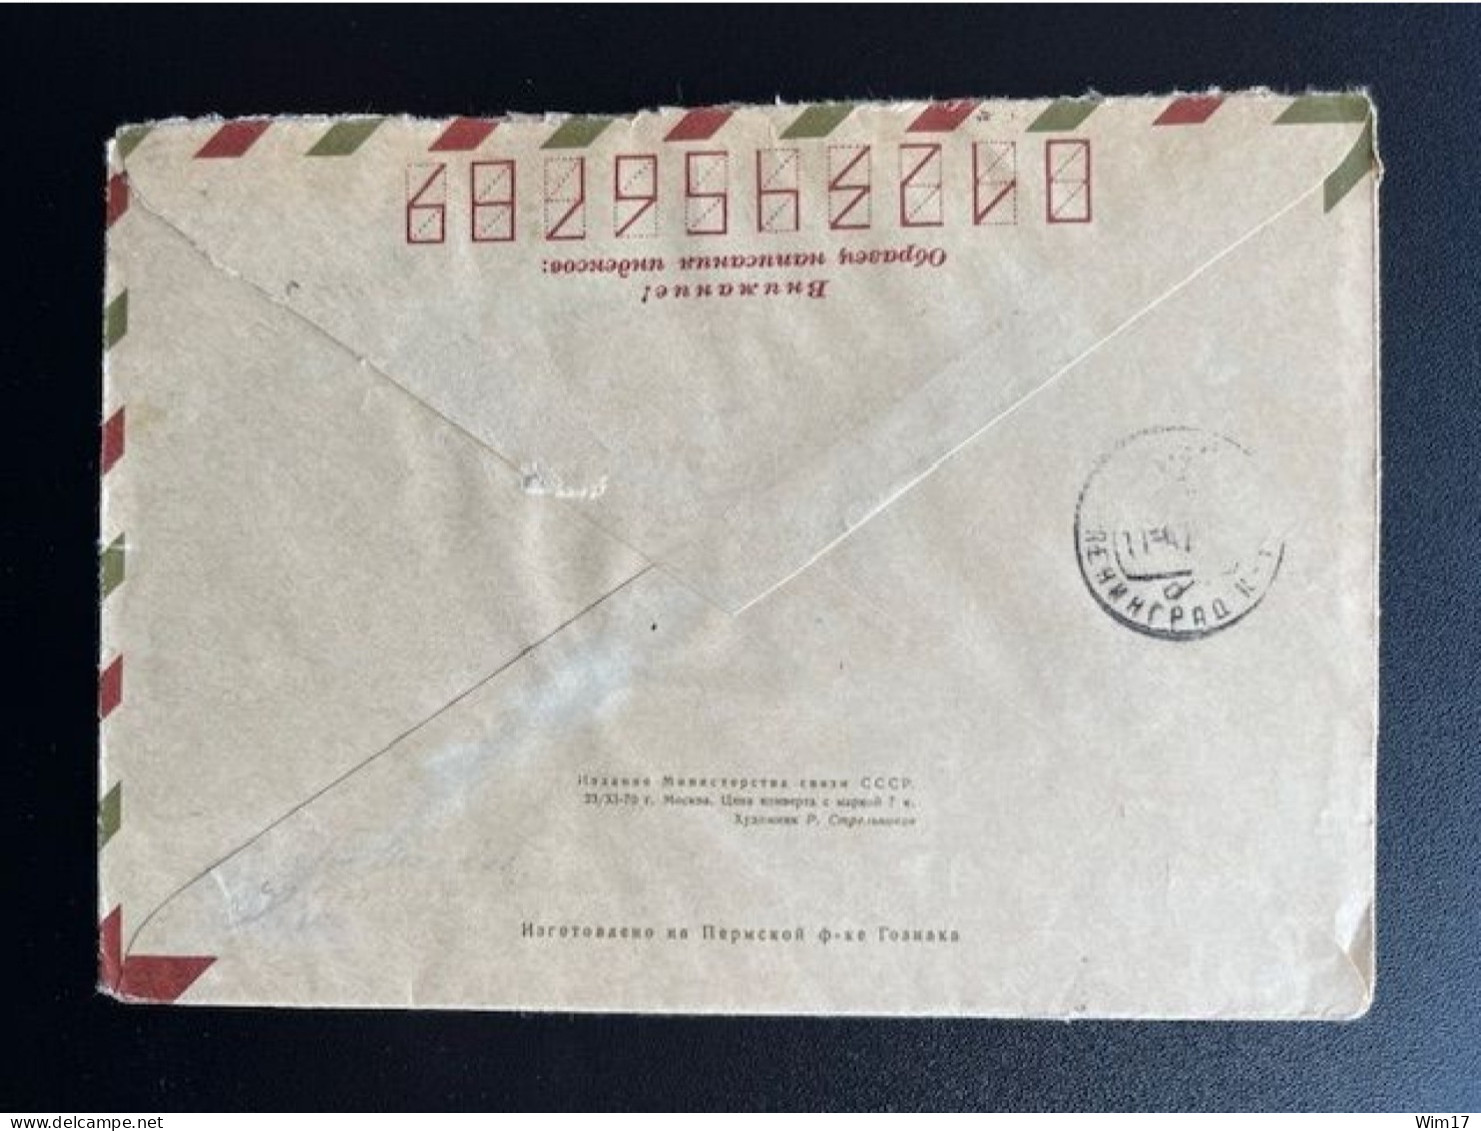 RUSSIA USSR 1971 REGISTERED LETTER MOSCOW 08-04-1971 SOVJET UNIE CCCP SOVIET UNION SPACE GAGARIN - Briefe U. Dokumente